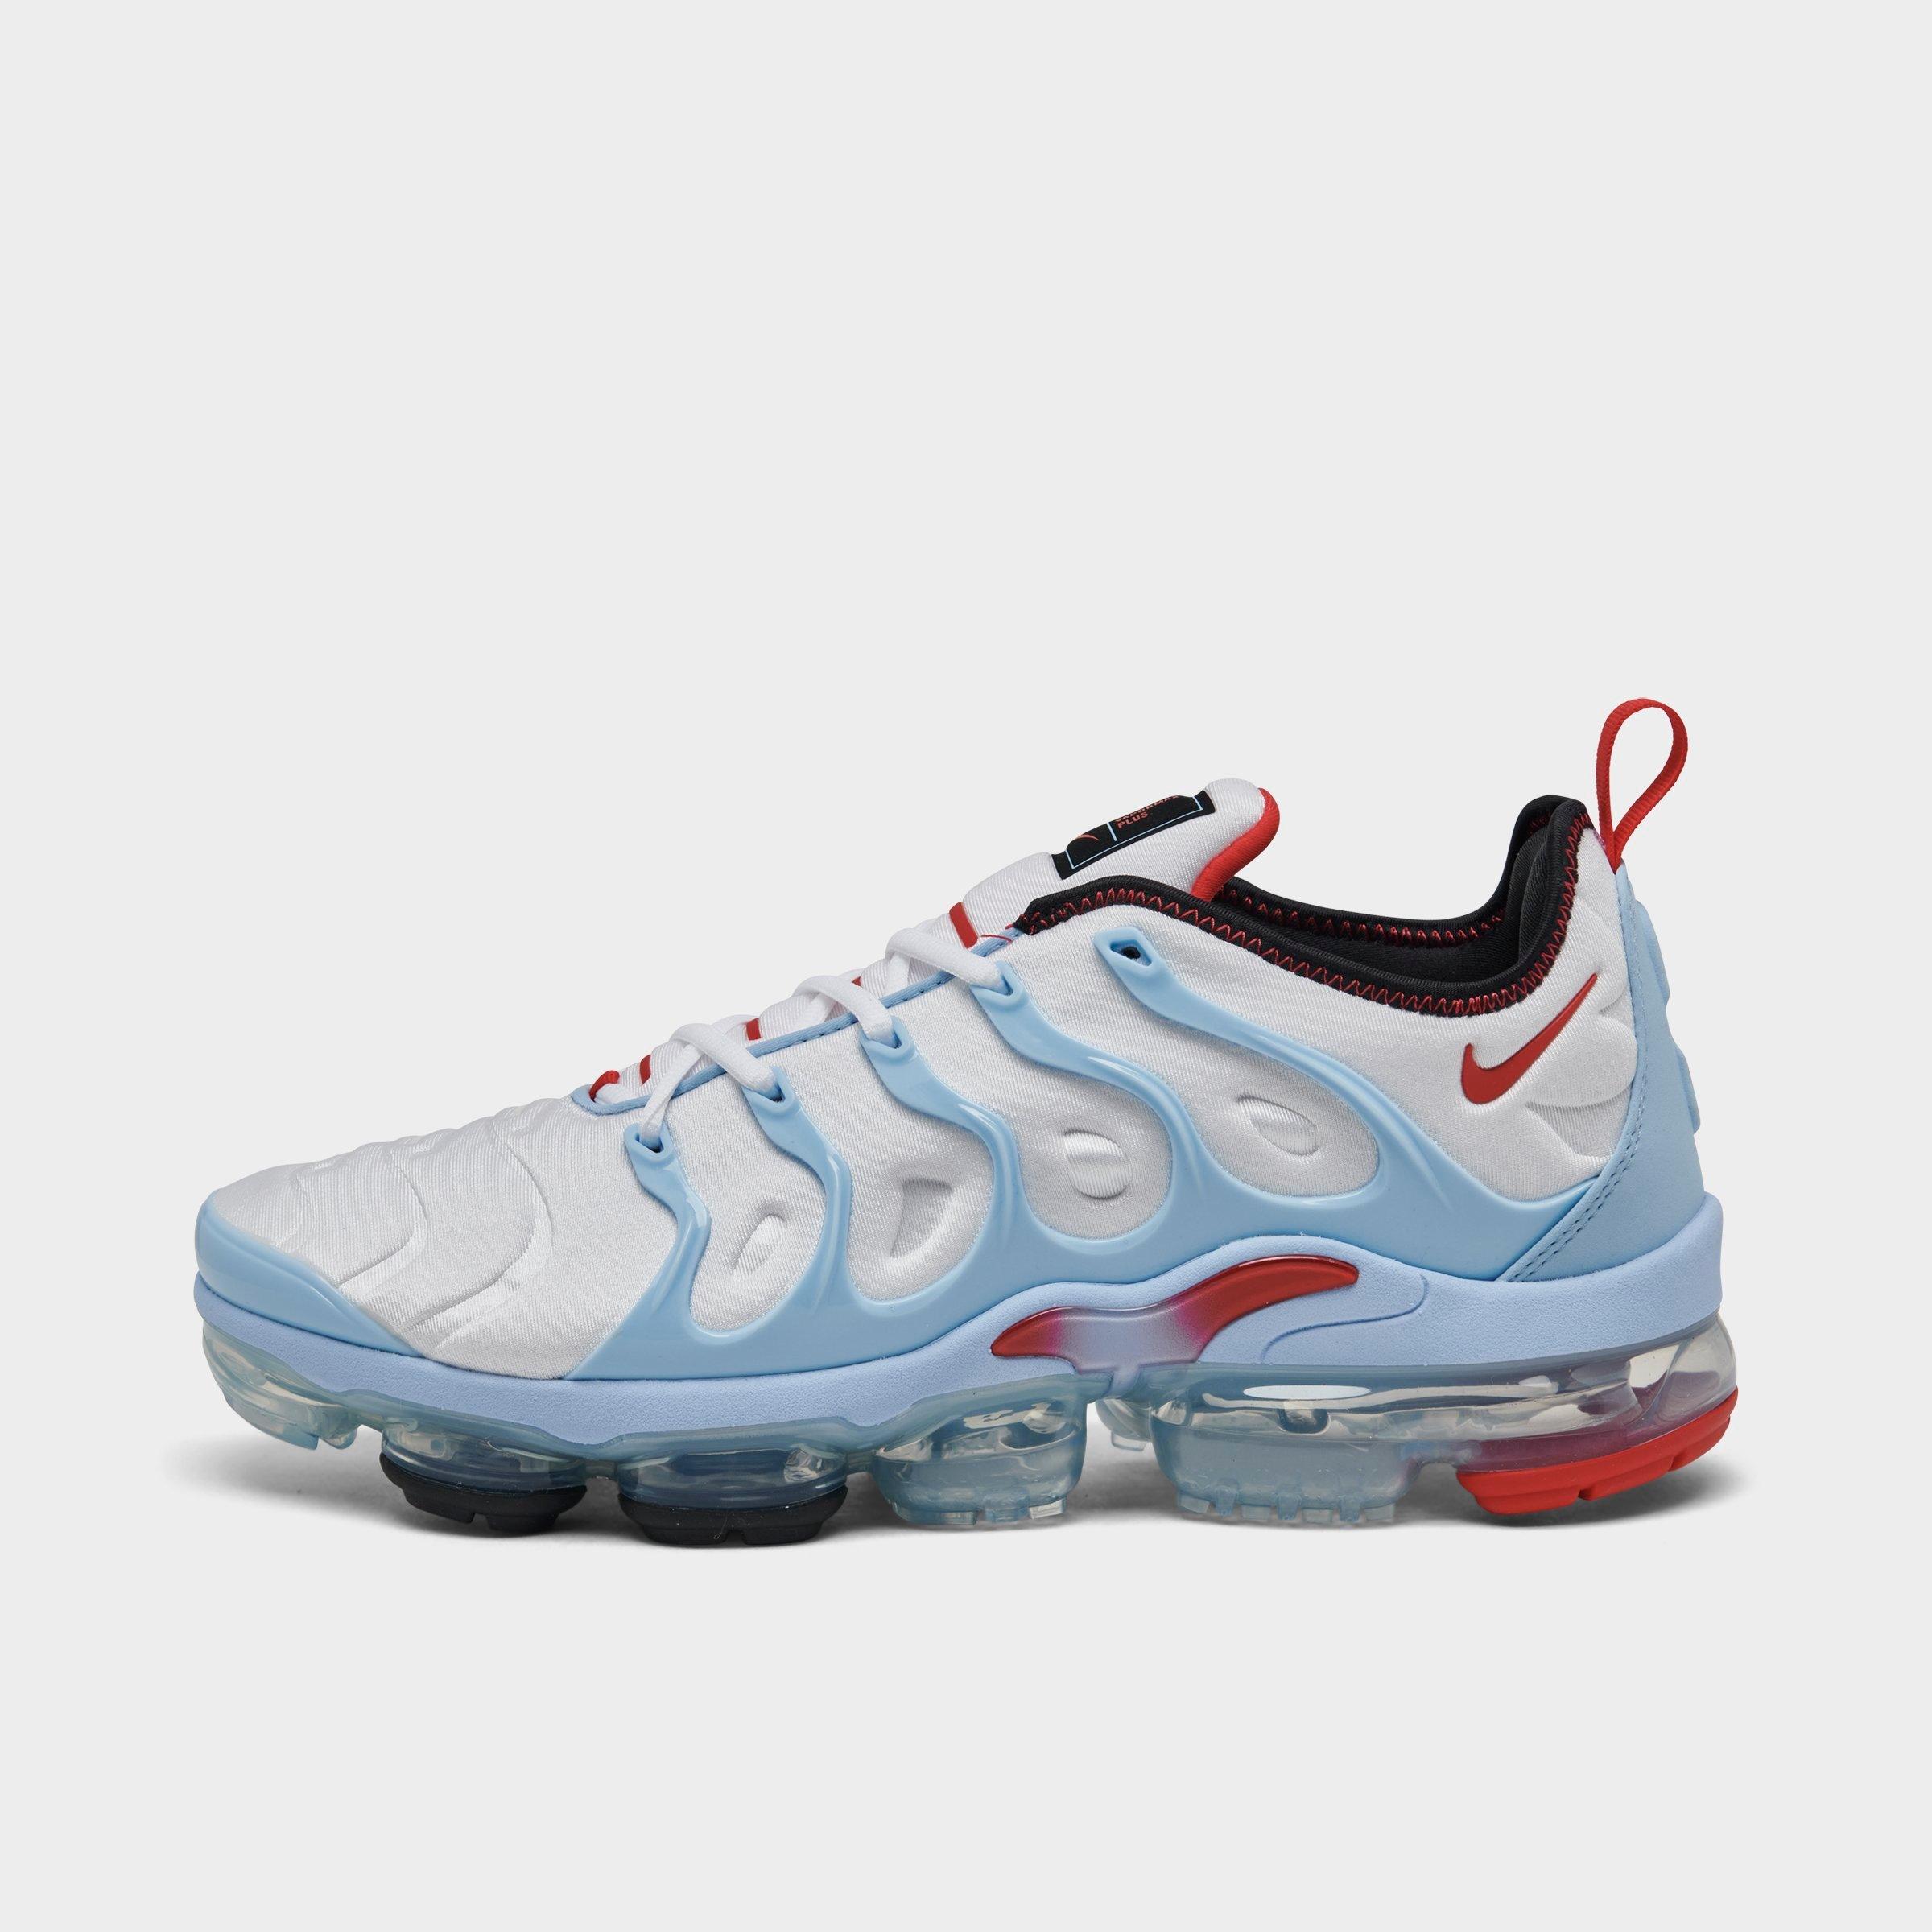 red white and blue nike vapormax plus